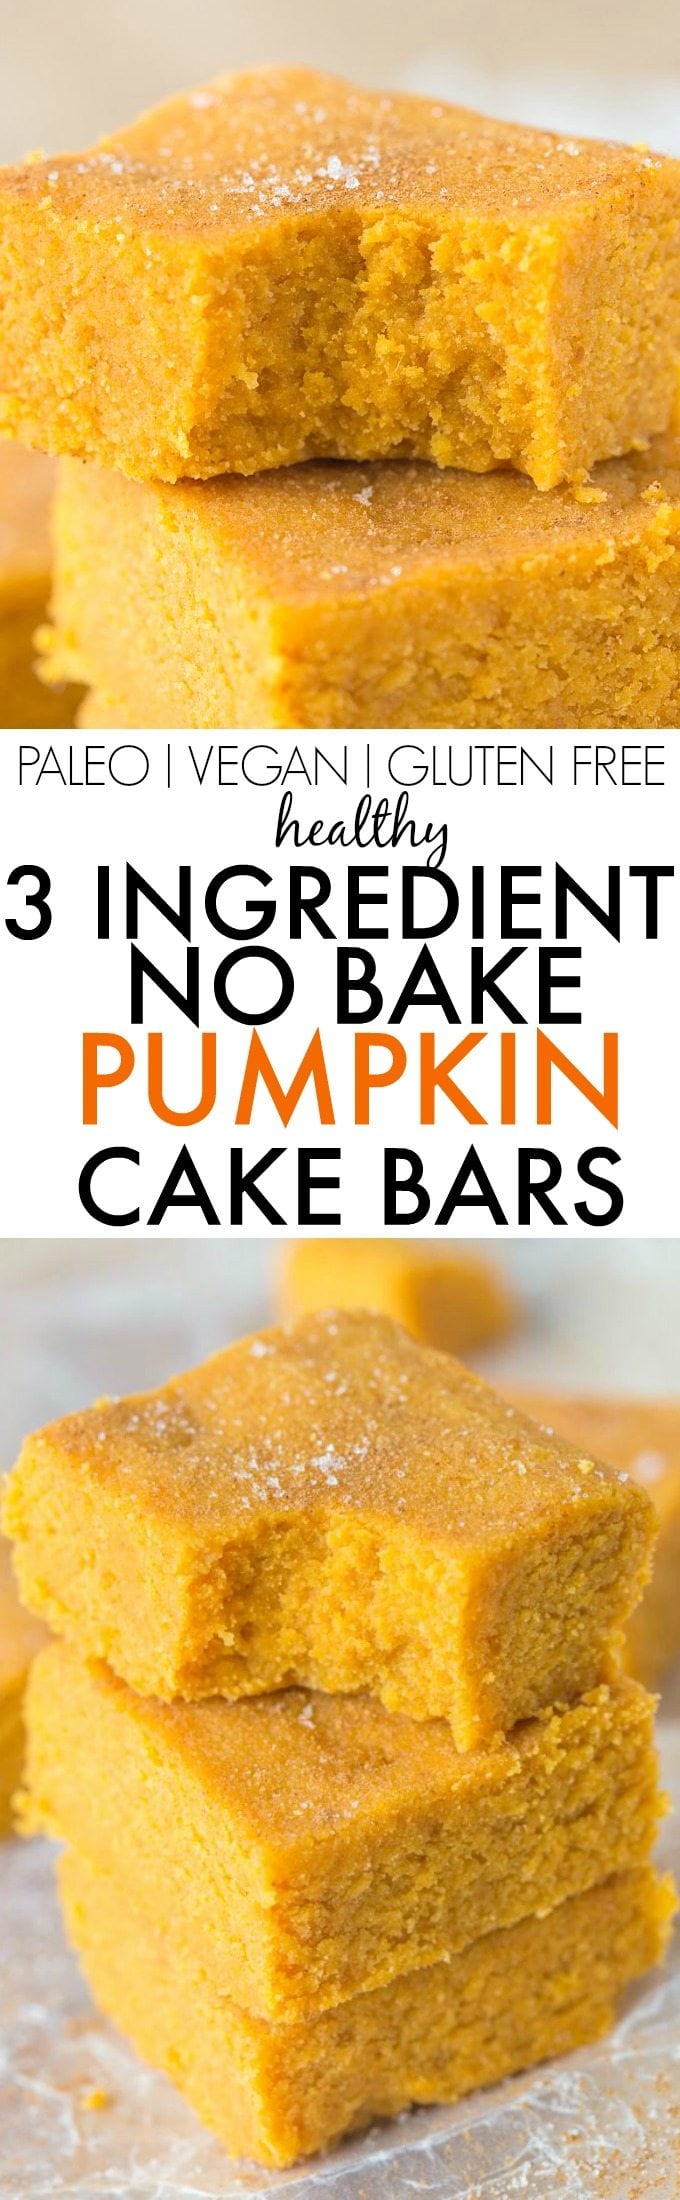 Healthy 3 Ingredient NO BAKE Pumpkin Cake Bars- Quick, easy and delicious cake bars LOADED with pumpkin flavor- Low fat and can be 100% sugar free! {vegan, gluten free, paleo recipe}- thebigmansworld.com